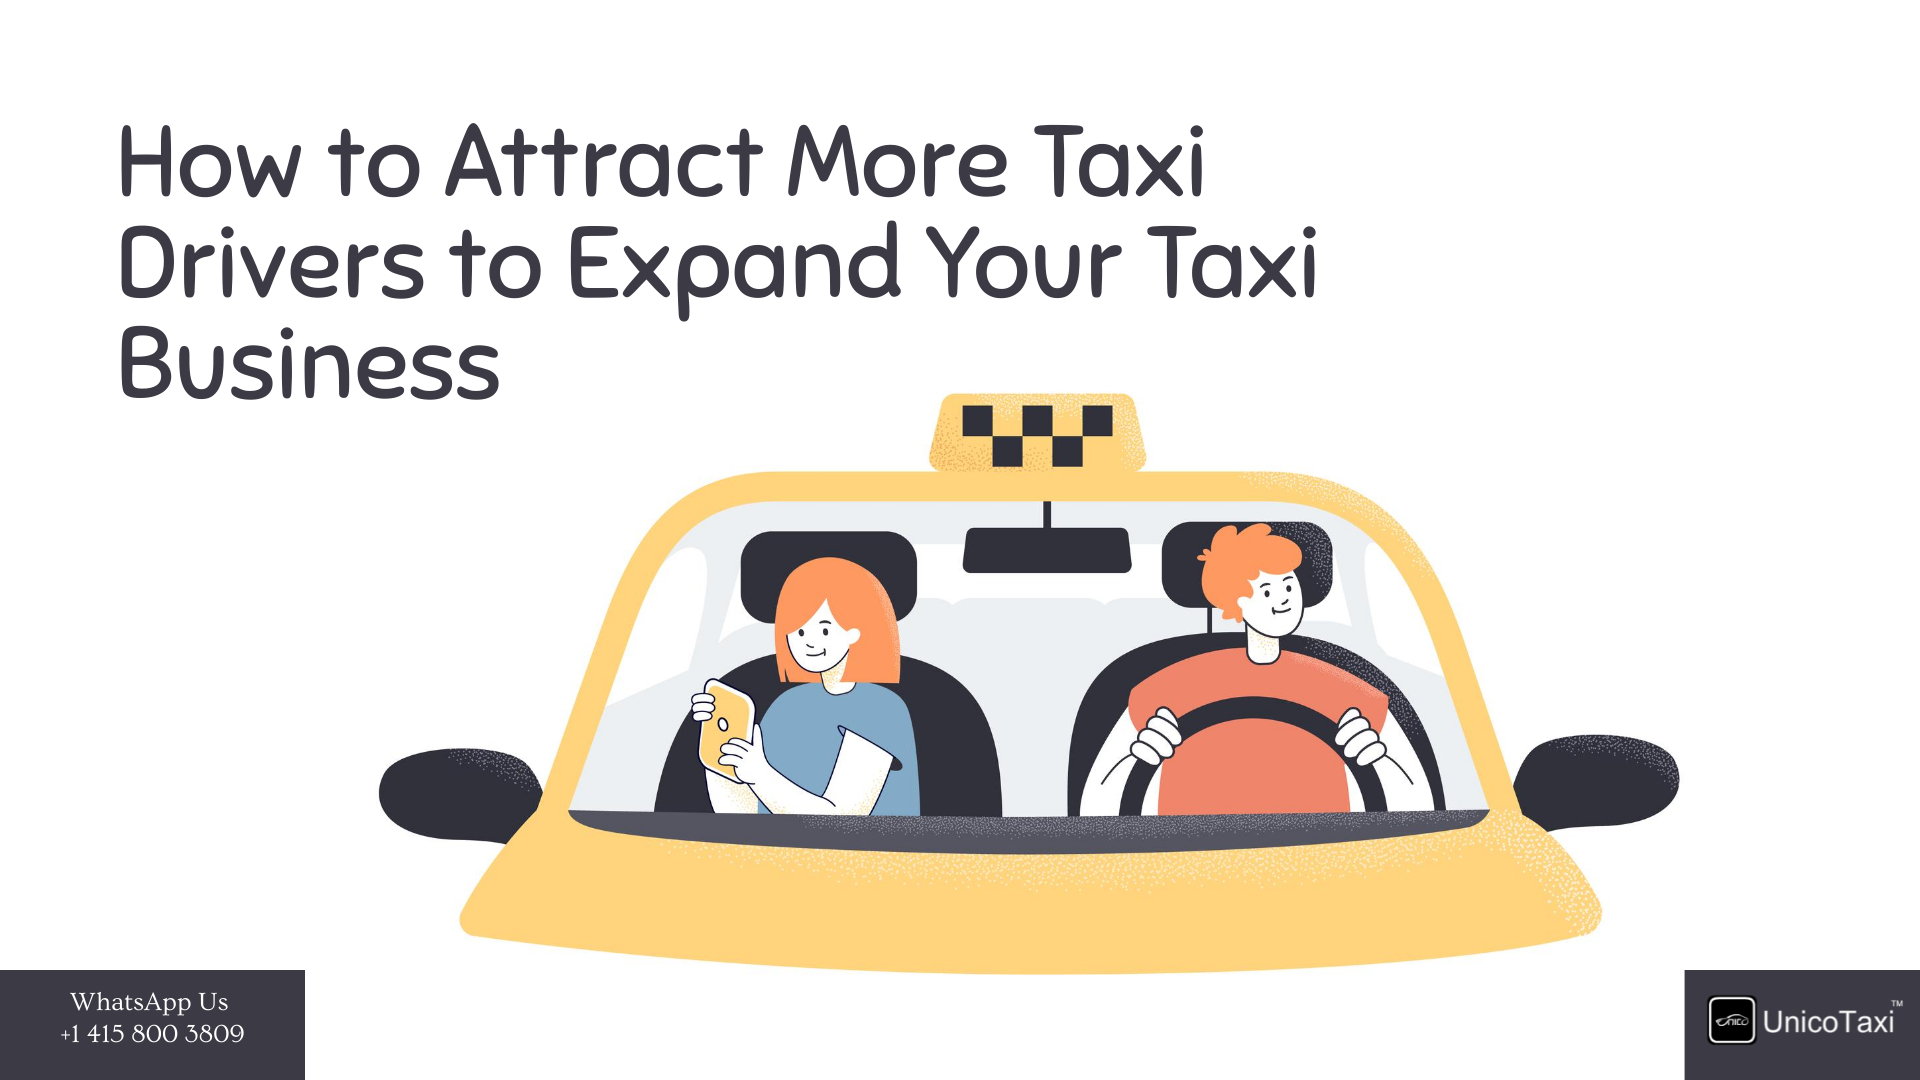 How to Attract More Taxi Drivers to Expand Your Taxi Business?